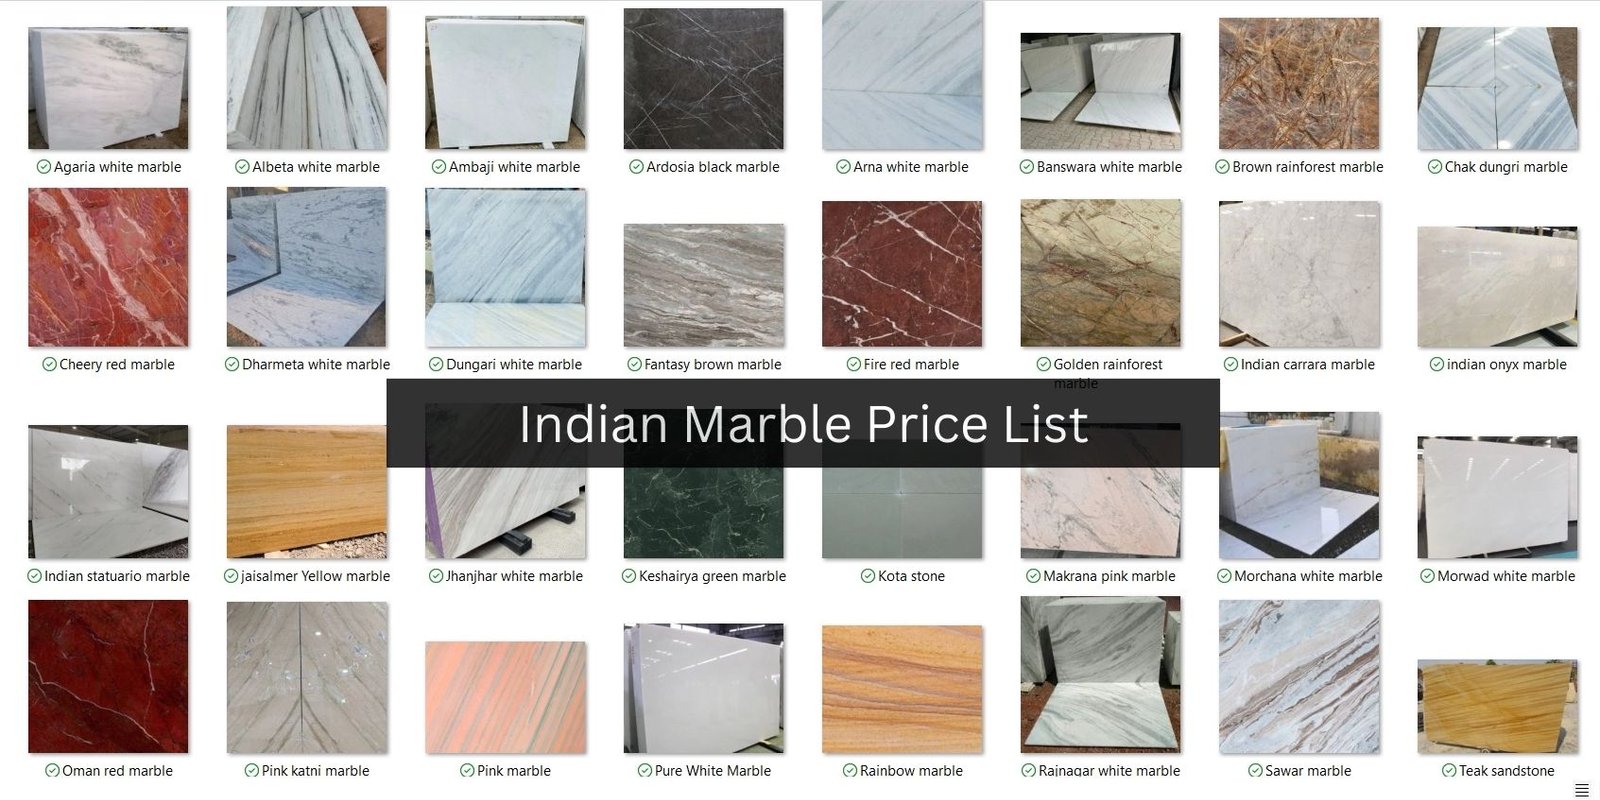 Indian Marble Price List